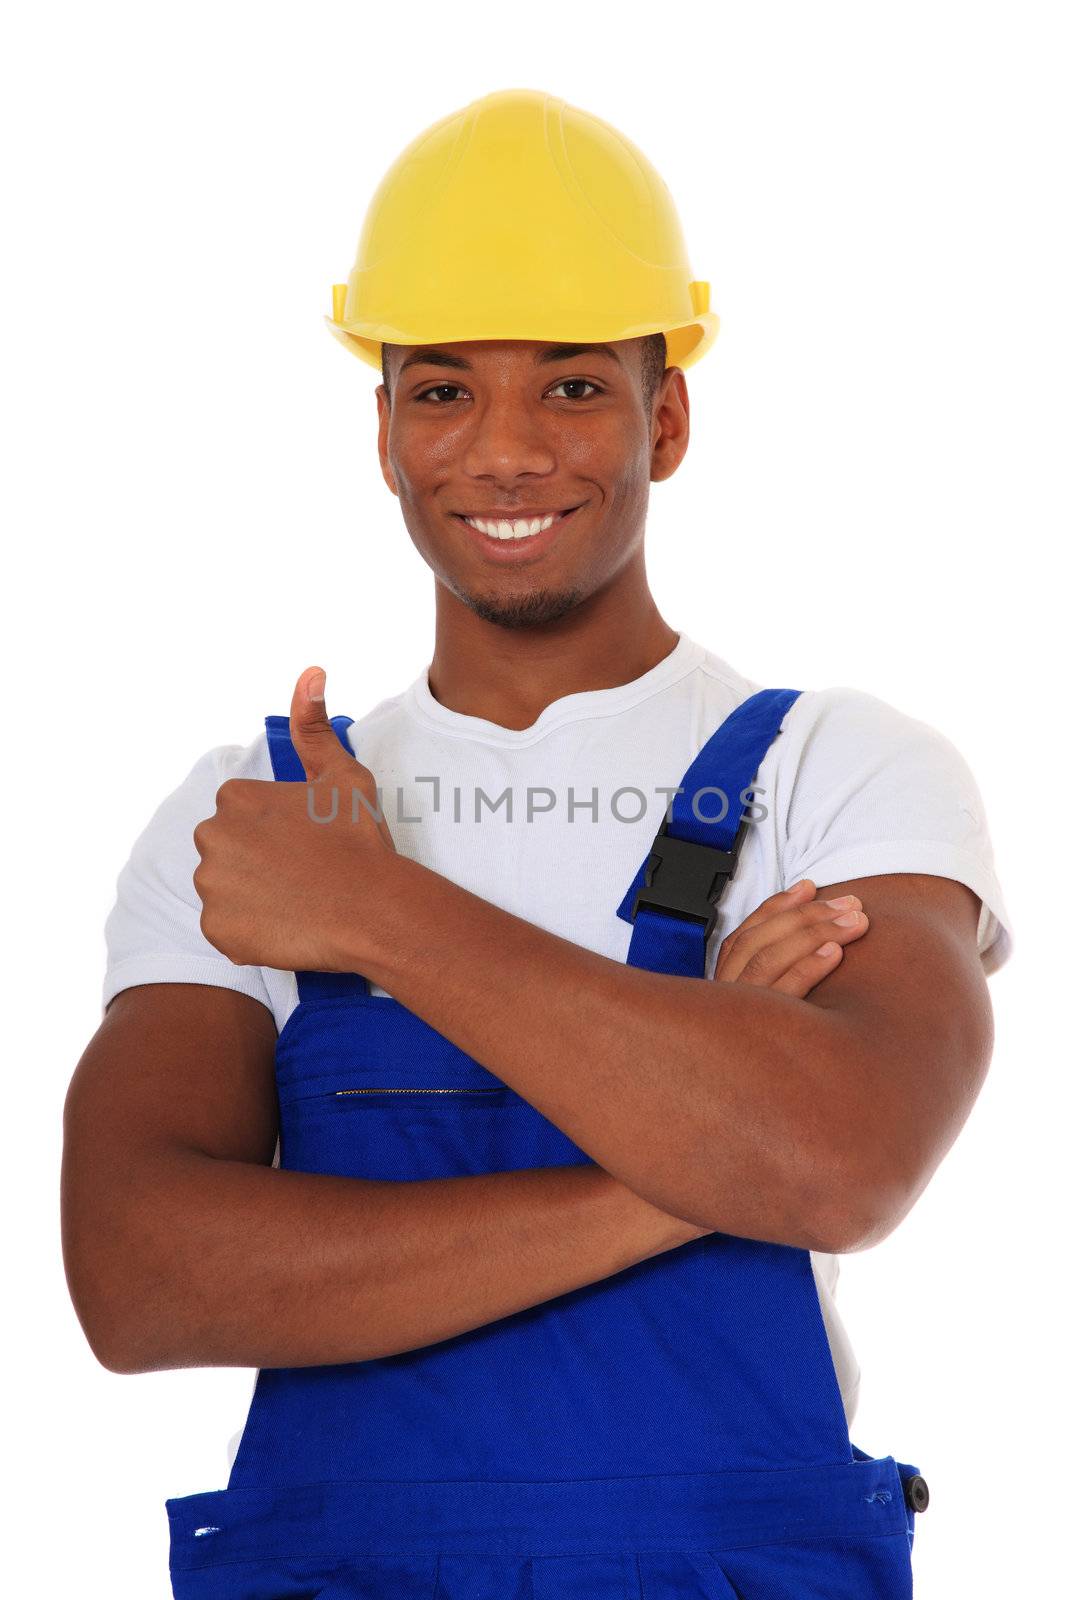 Attractive black manual worker showing thumb up. All on white background.